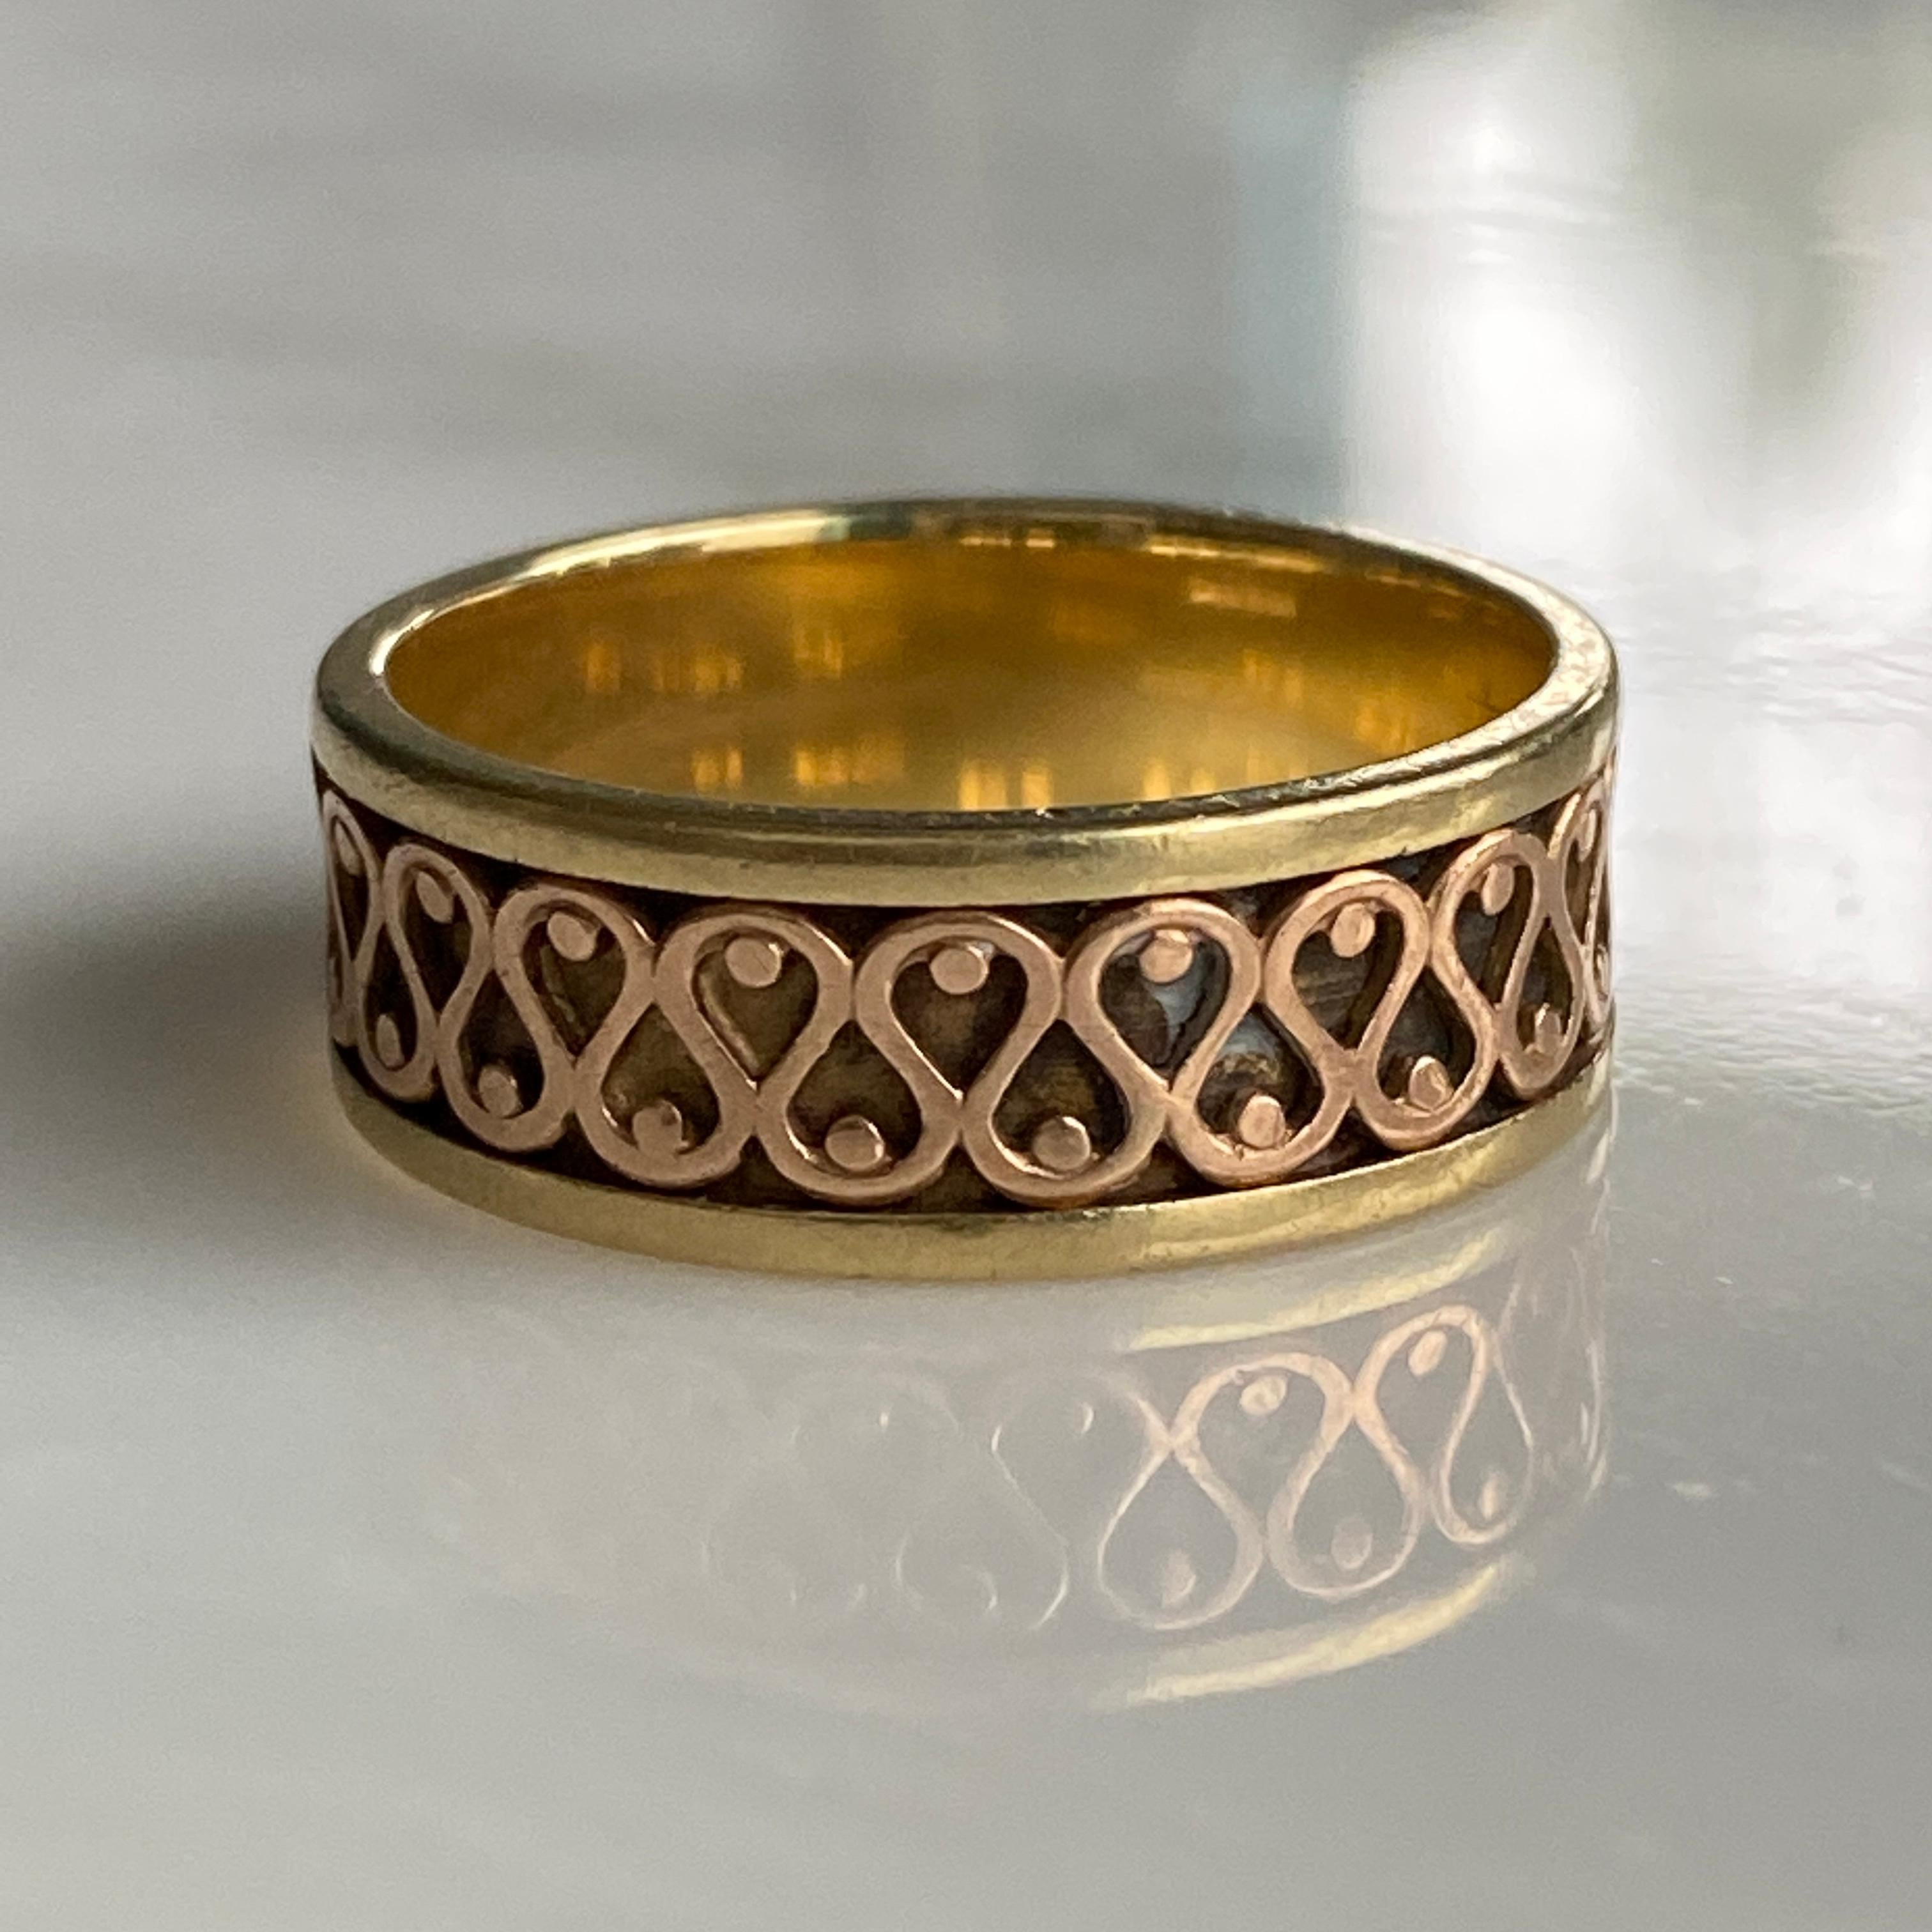 Details:
Lovely vintage two-tone 14K gold band. Would make a lovely wedding band, or simply a great ring for any occasion!! The beautiful two-tone pattern goes all the way around the entire band in 14K yellow and rose gold. The hallmarks on the